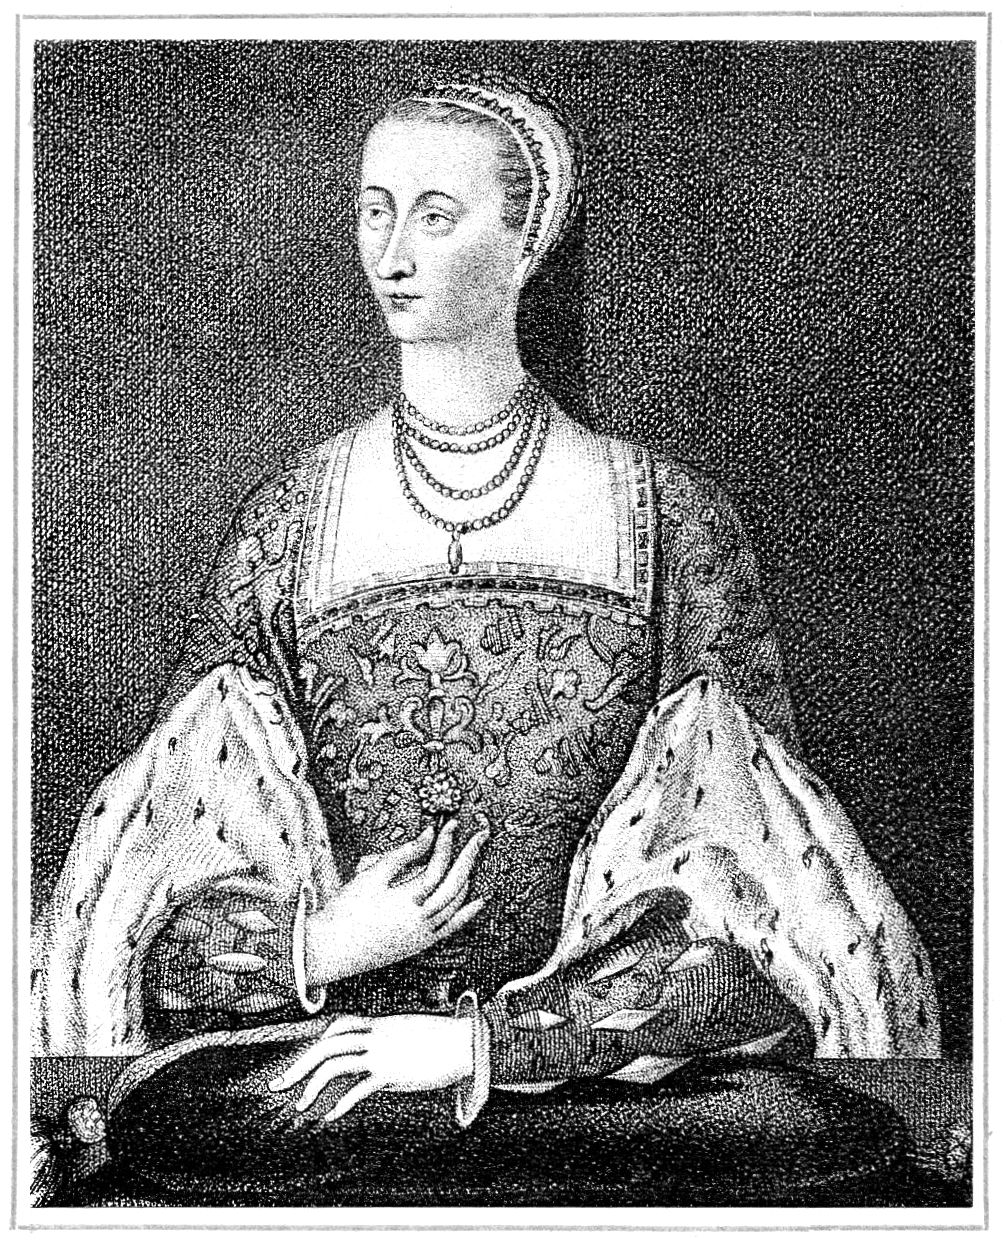 Portrait of Mary of Guise, Queen of James V.